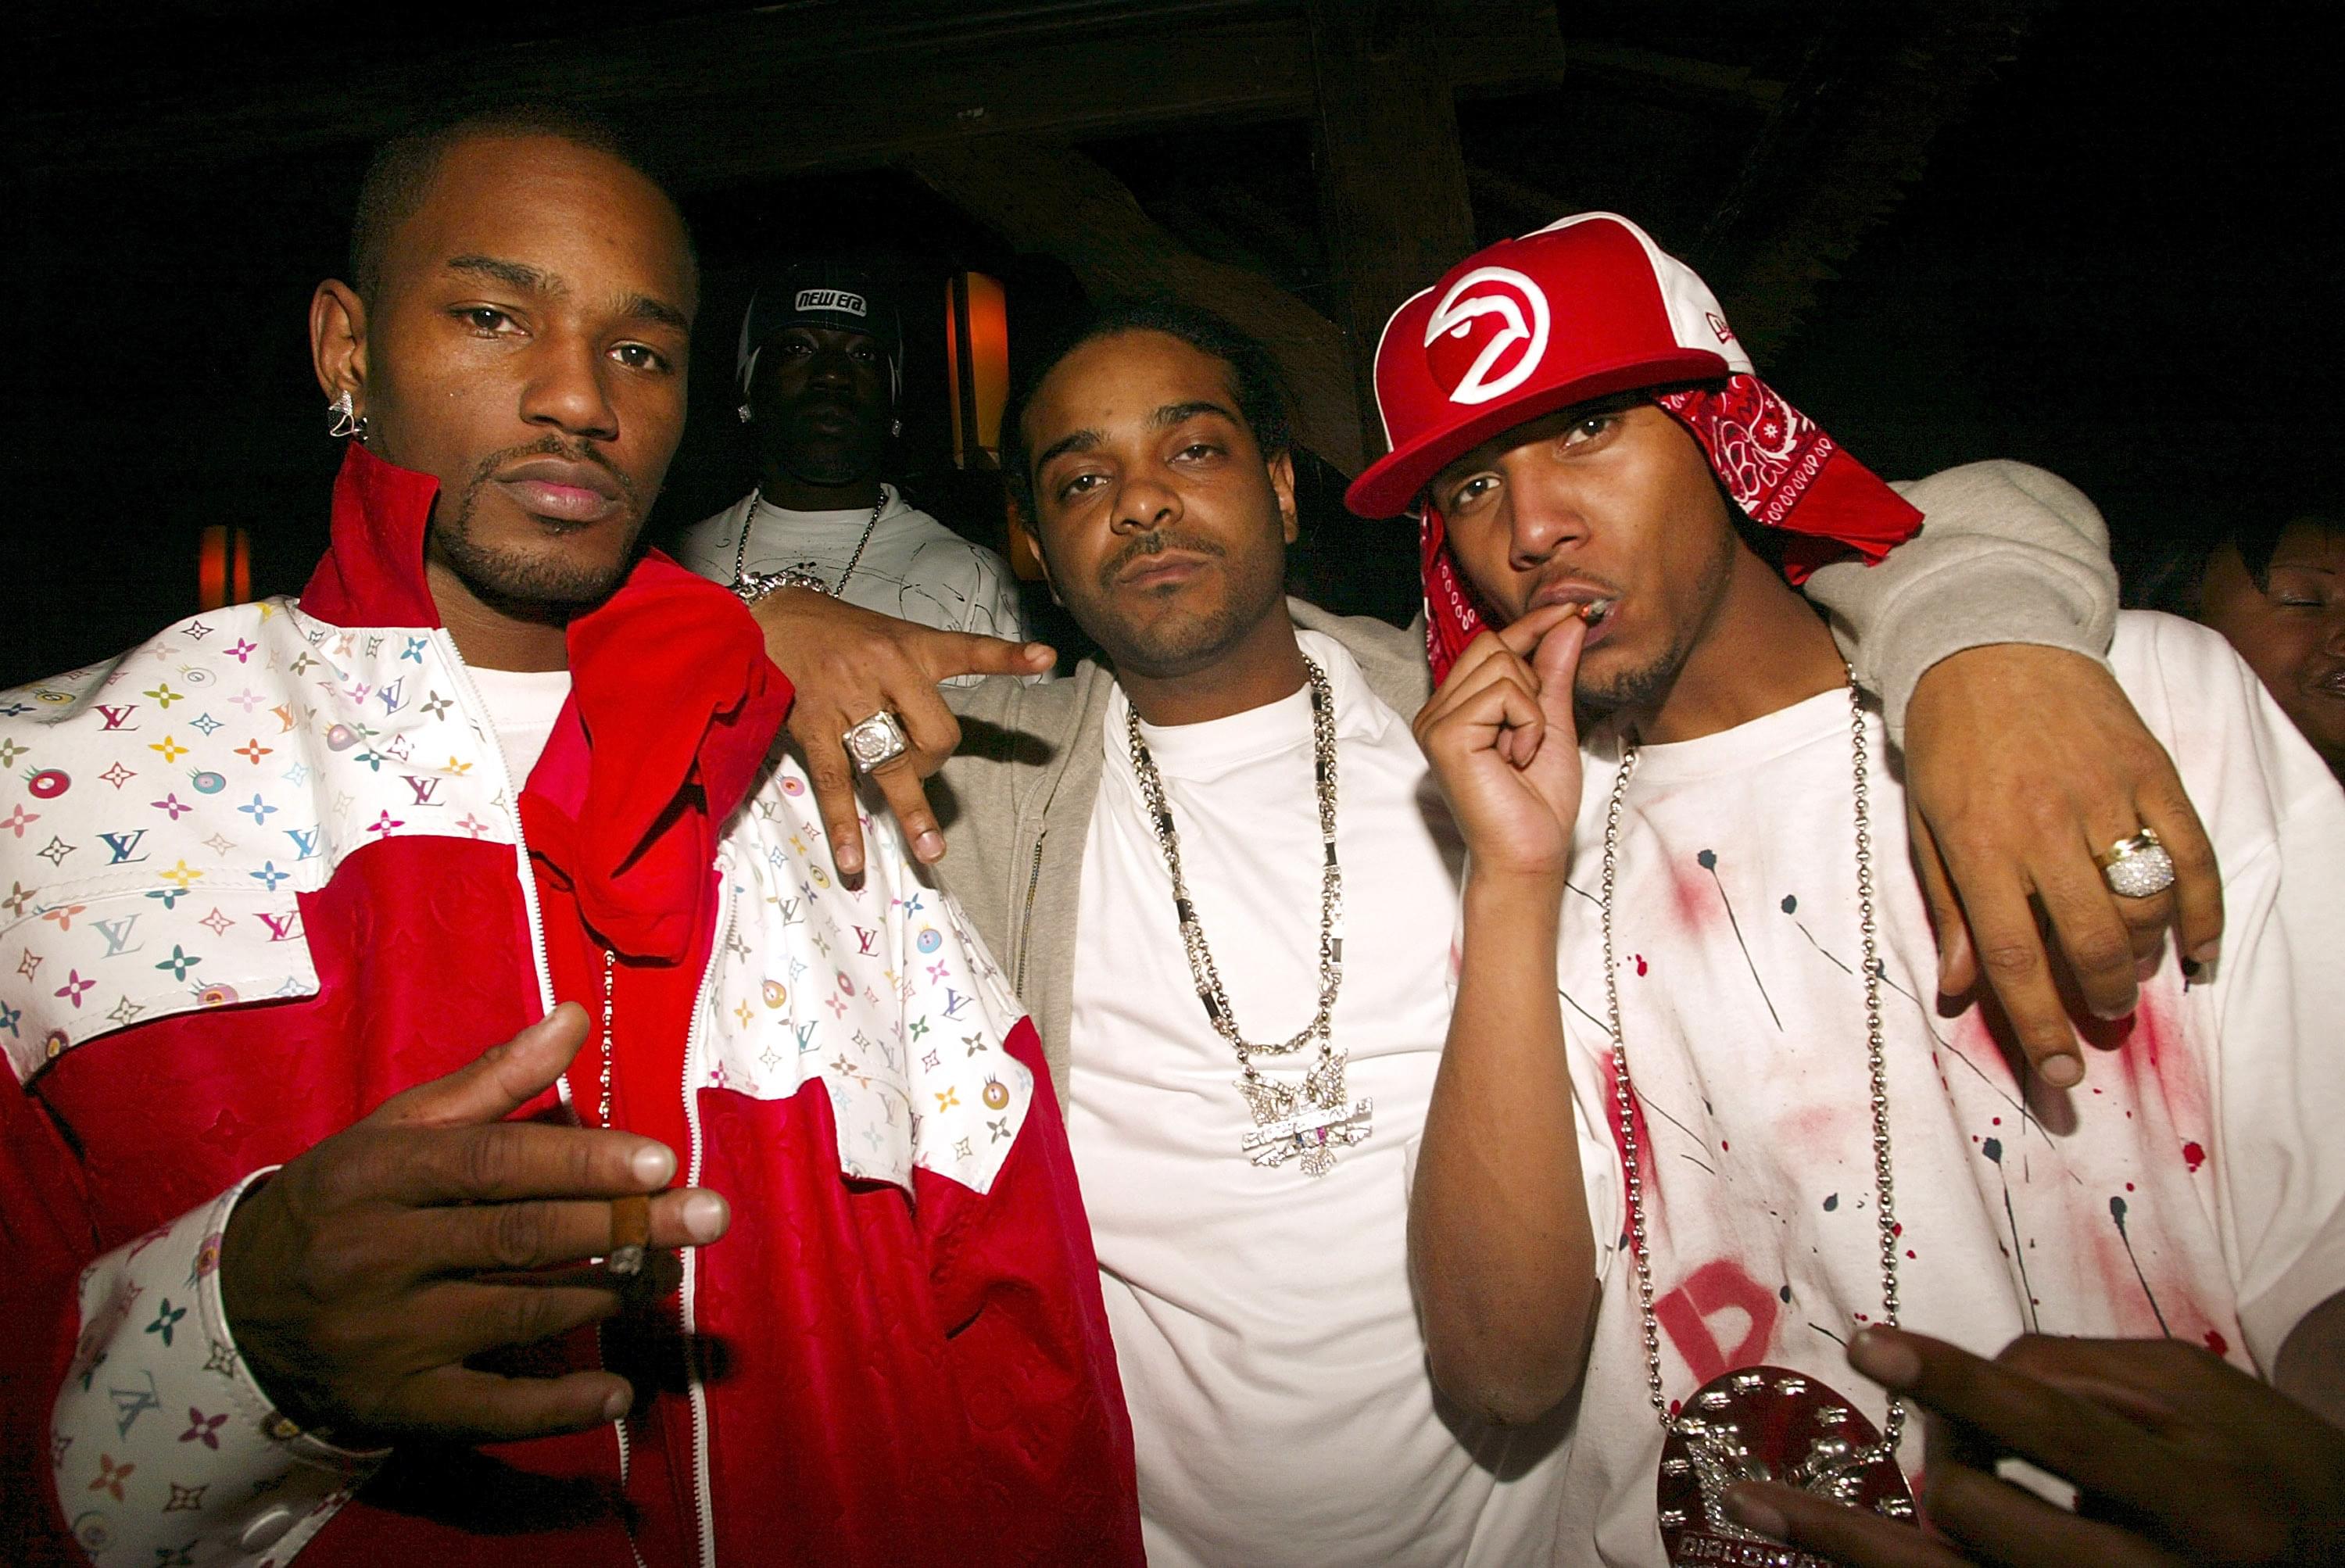 Jim Jones & Cam’ron Receive Backlash From Veterans After Wearing Military Uniform Onstage